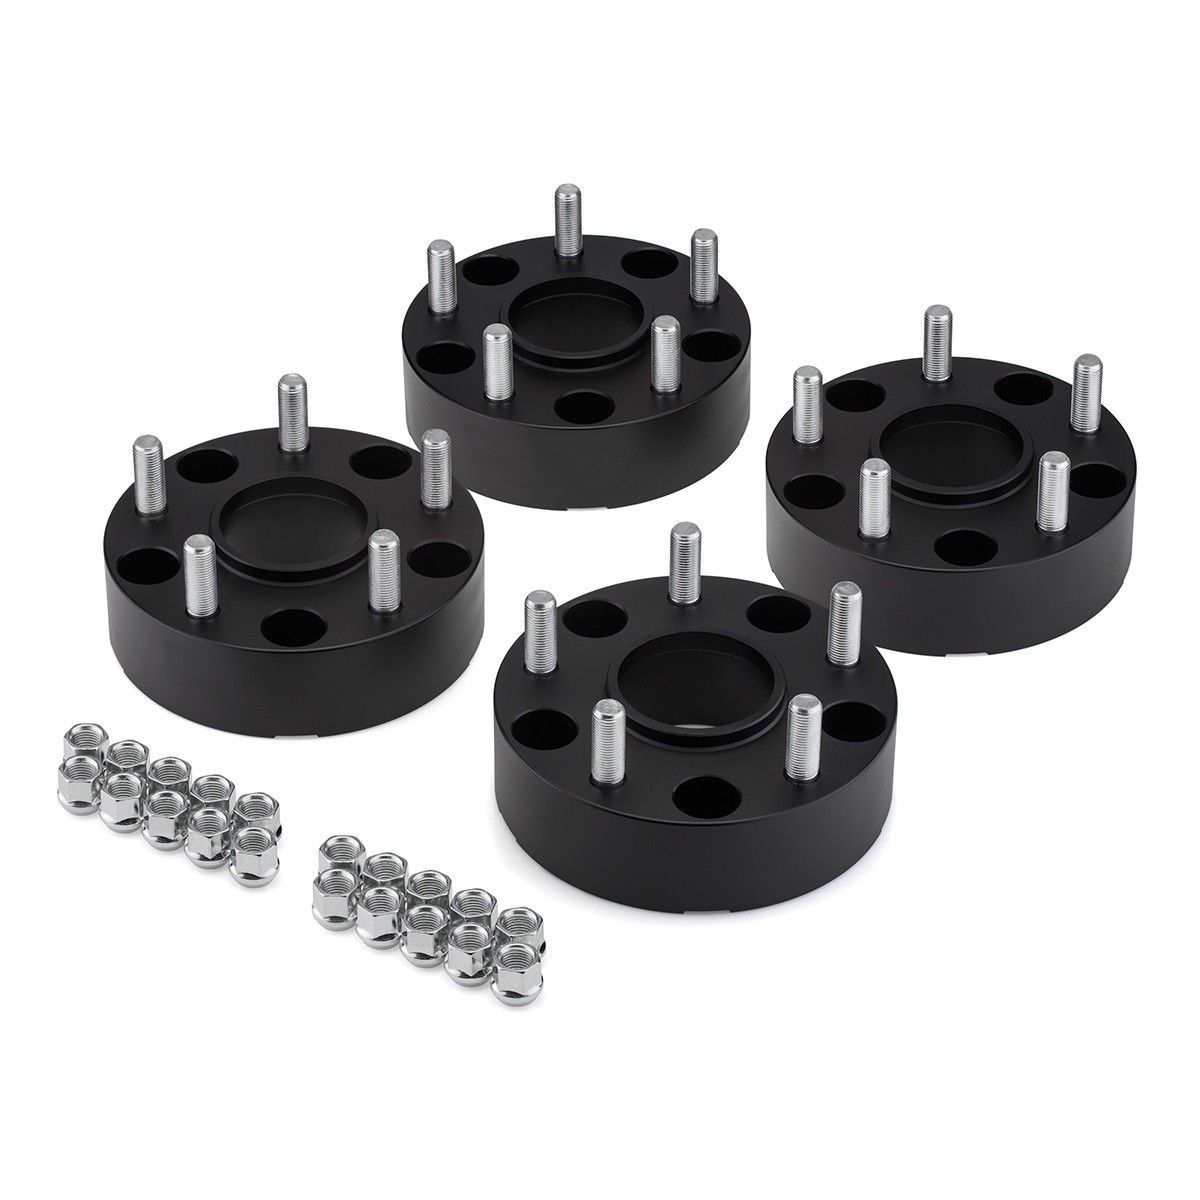 FITS 2003-2014 NISSAN MURANO Hub-Centric Wheel Spacers Kit (4pc)